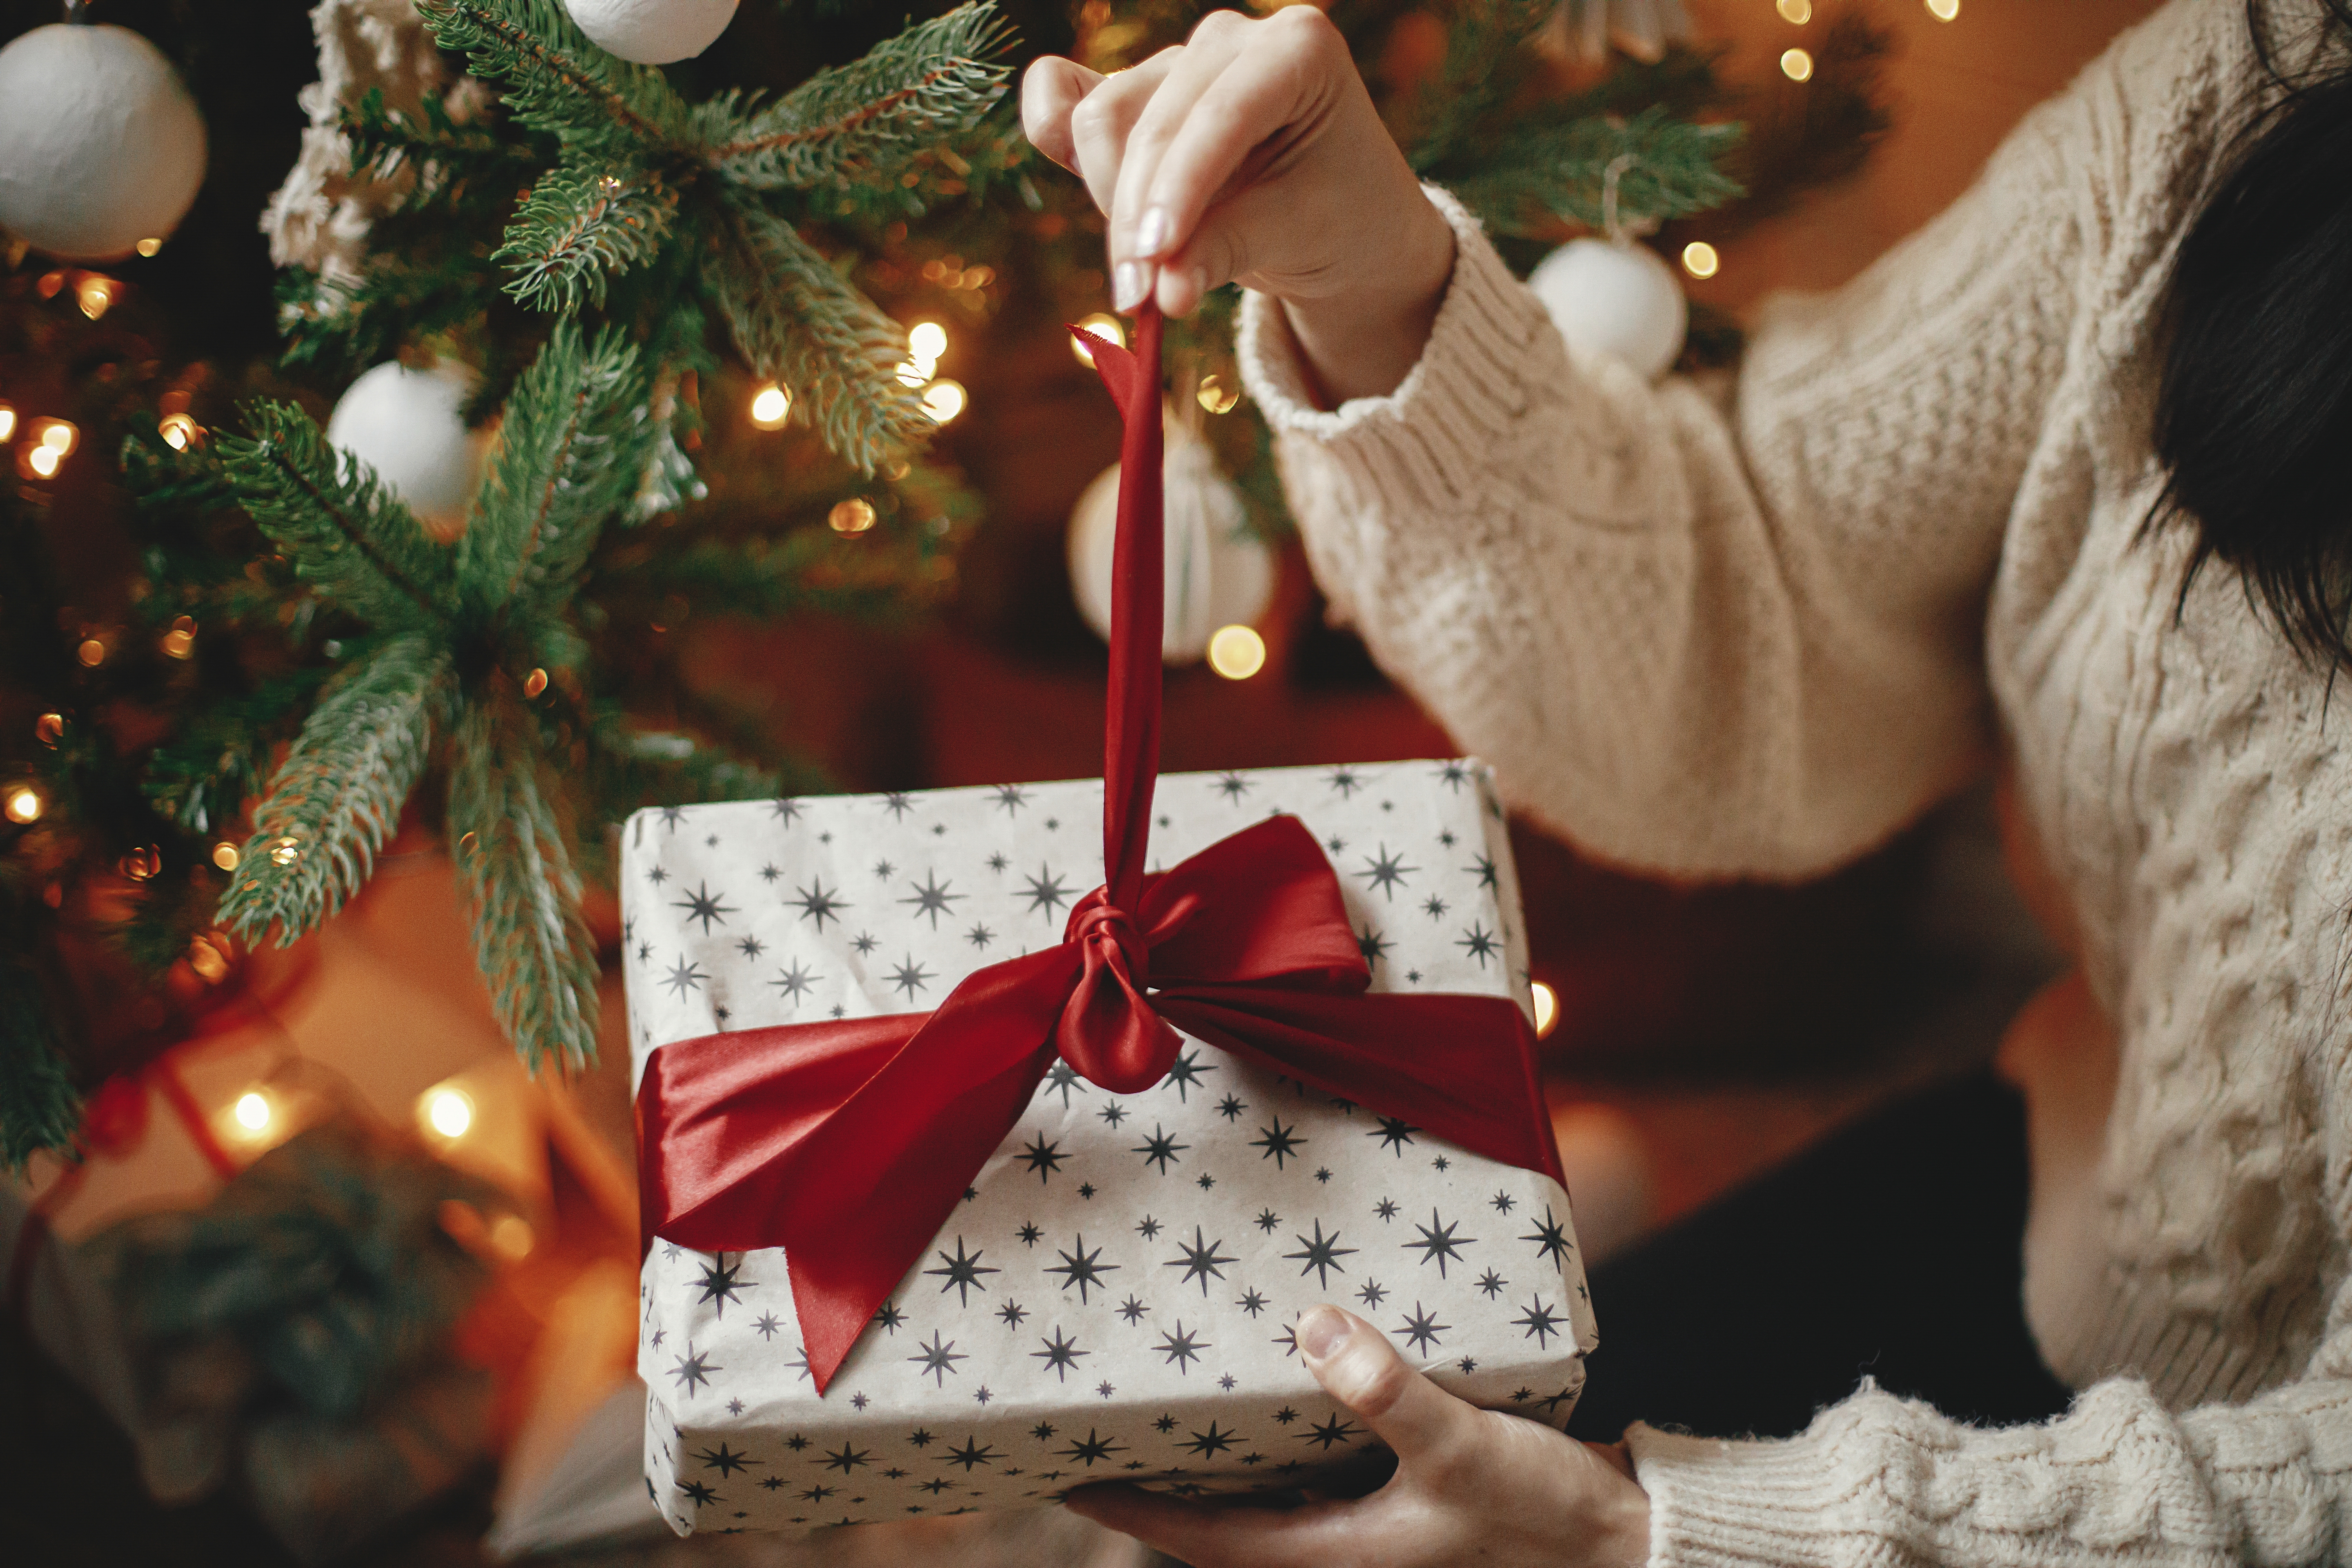 Hands in a cozy sweater opening a Christmas gift | Source: Shutterstock